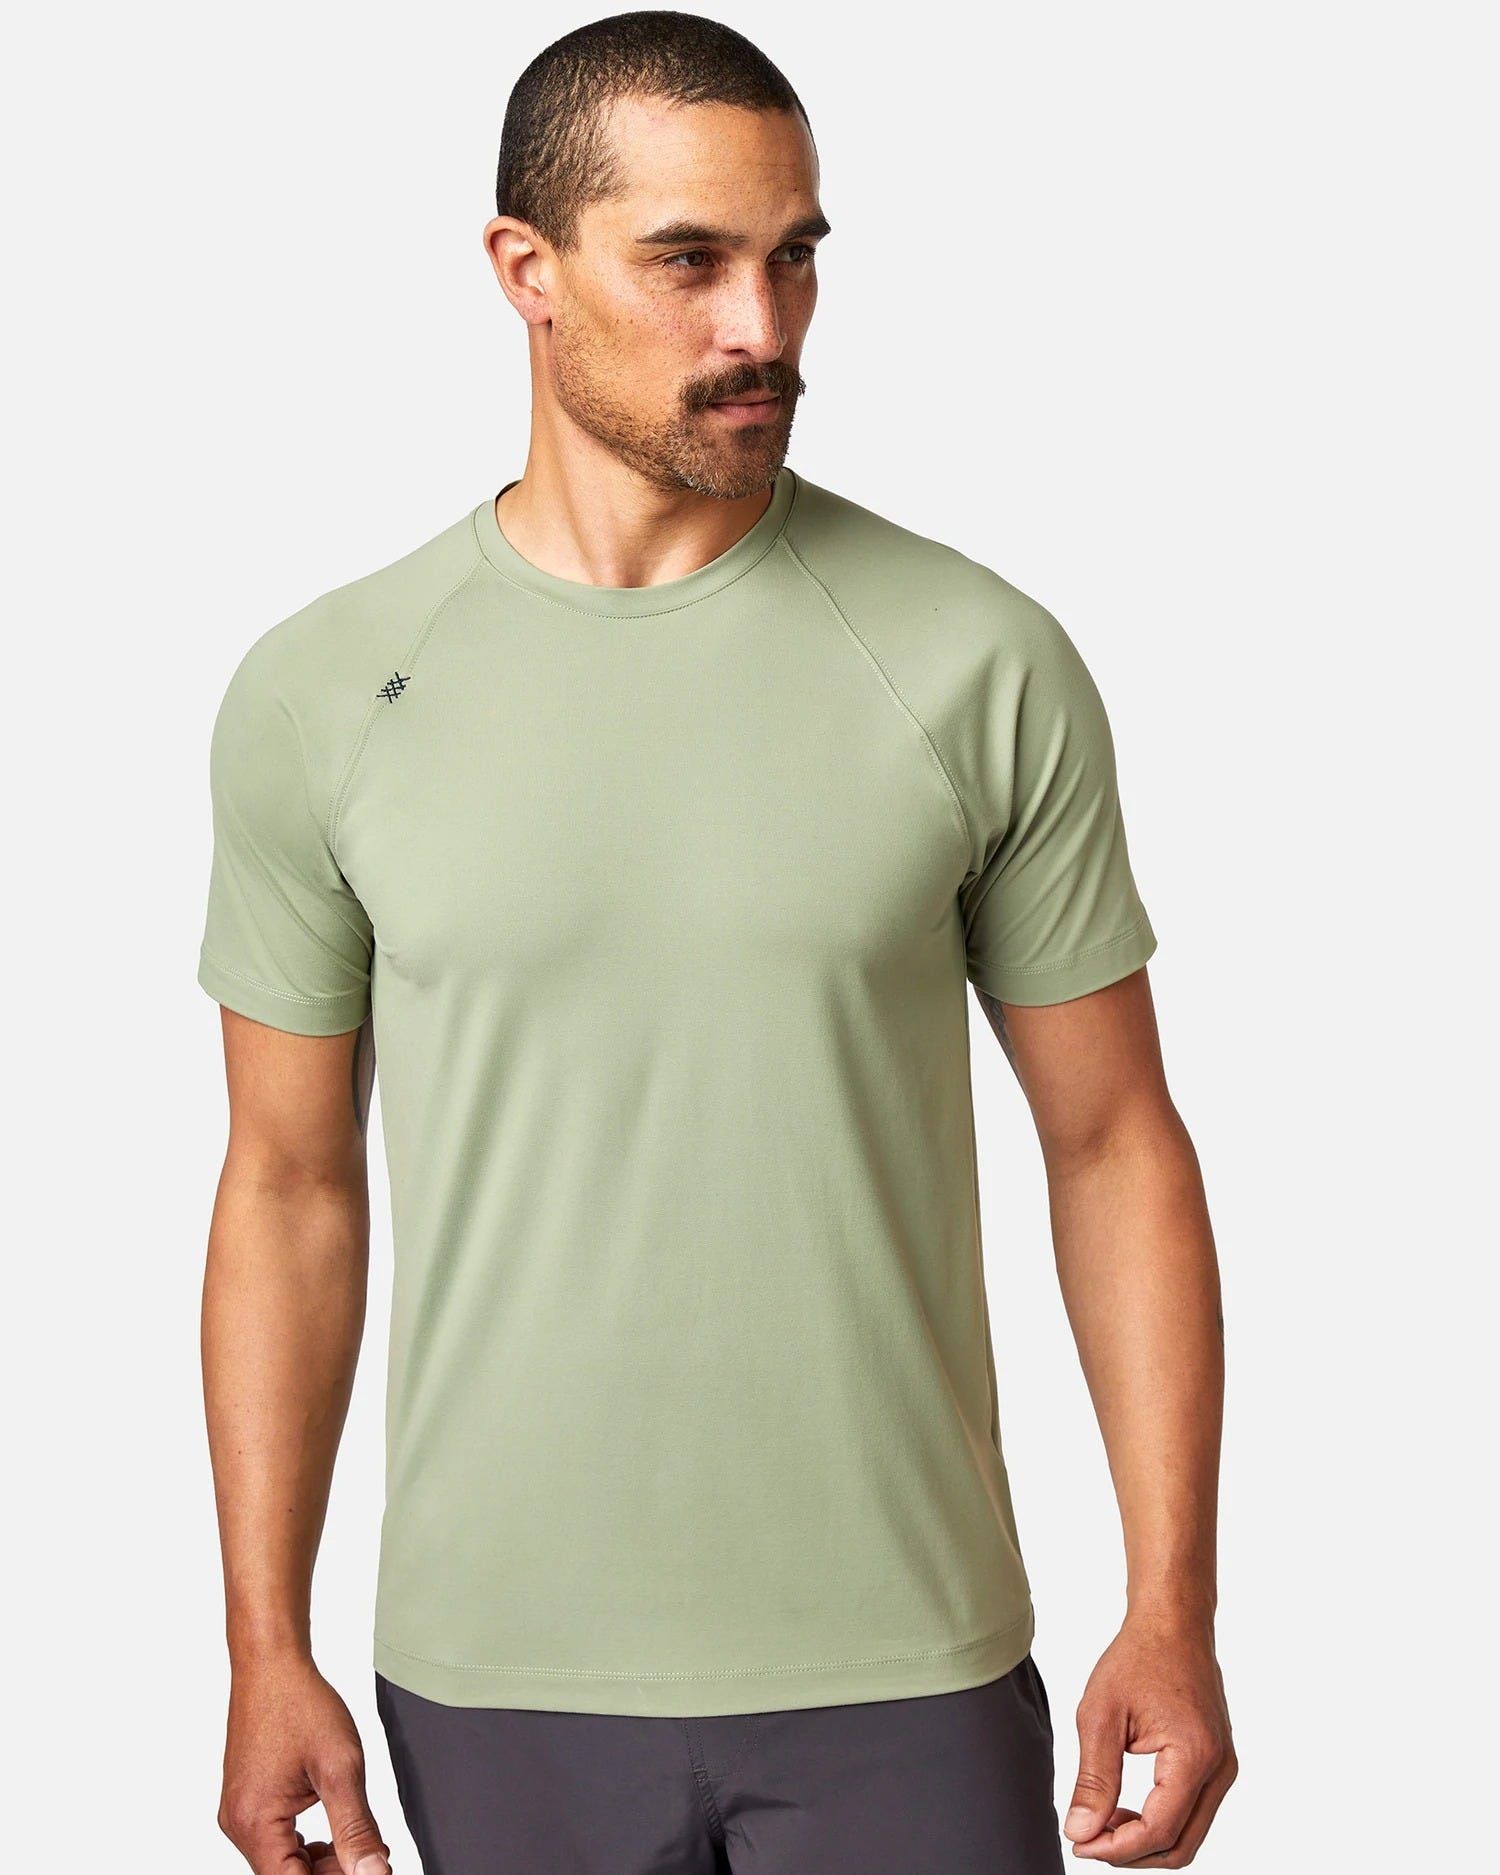 Mens Short Sleeve Moisture Wicking Cool Dri T-Shirts Outdoor Athletic Shirts 